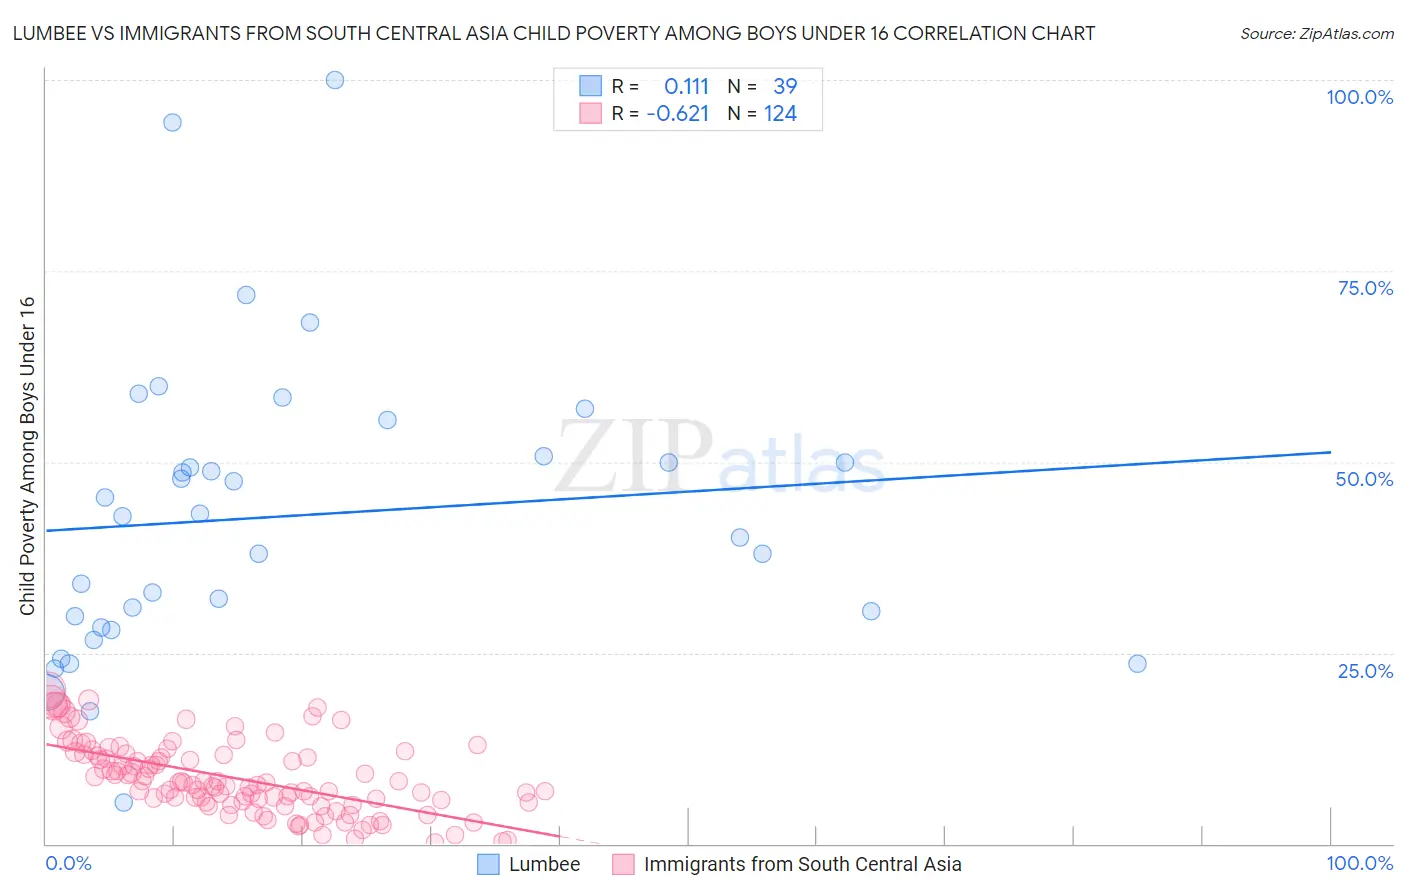 Lumbee vs Immigrants from South Central Asia Child Poverty Among Boys Under 16